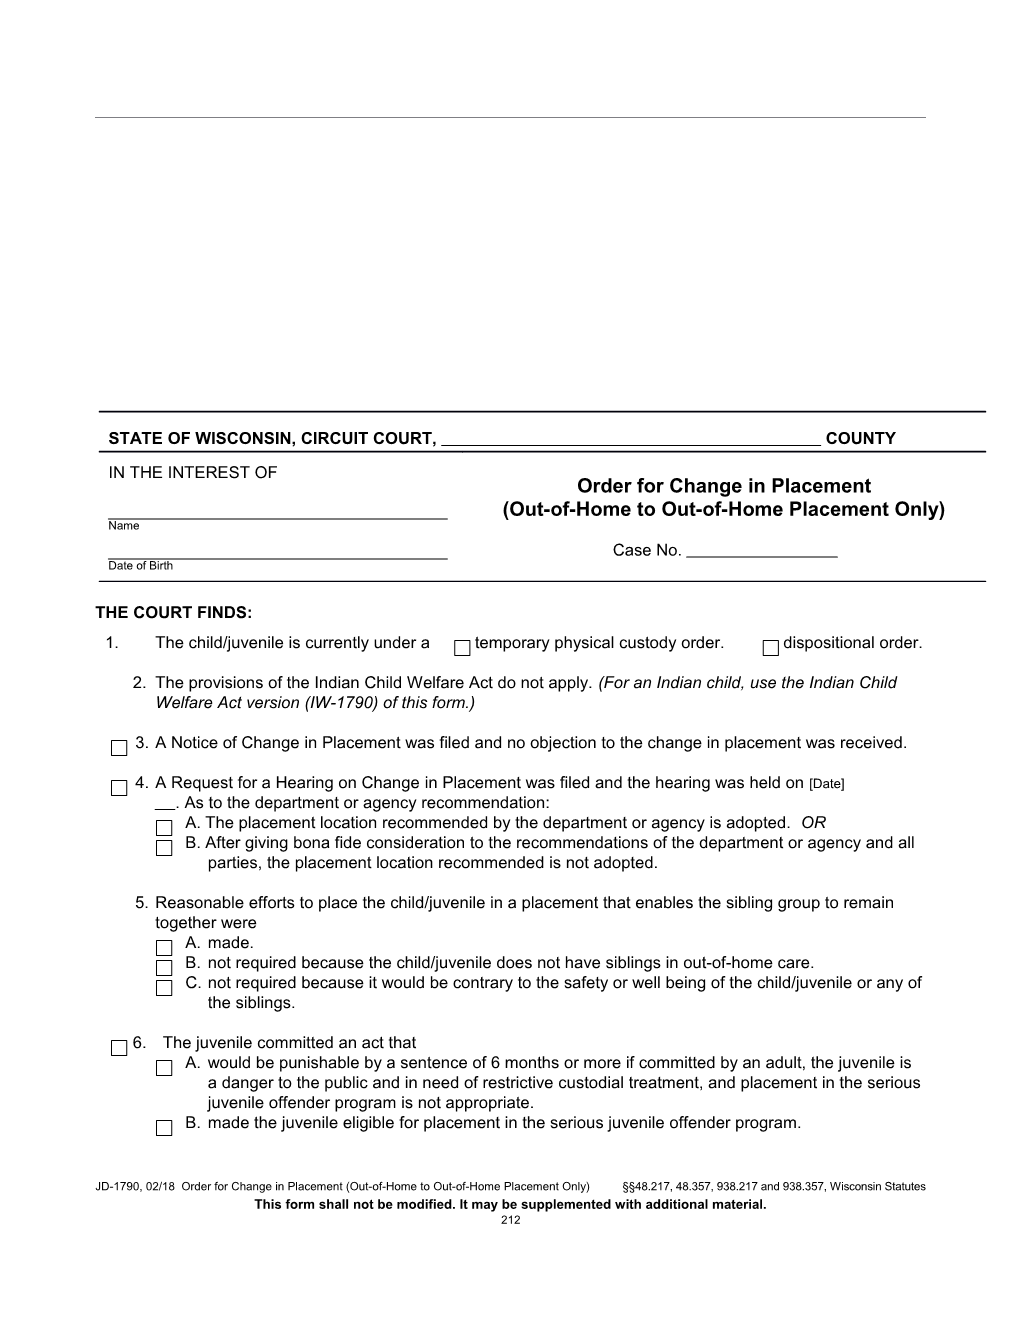 JD-1790: Order for Change in Placement (Out-Of-Home to Out-Of-Home Placement Only)